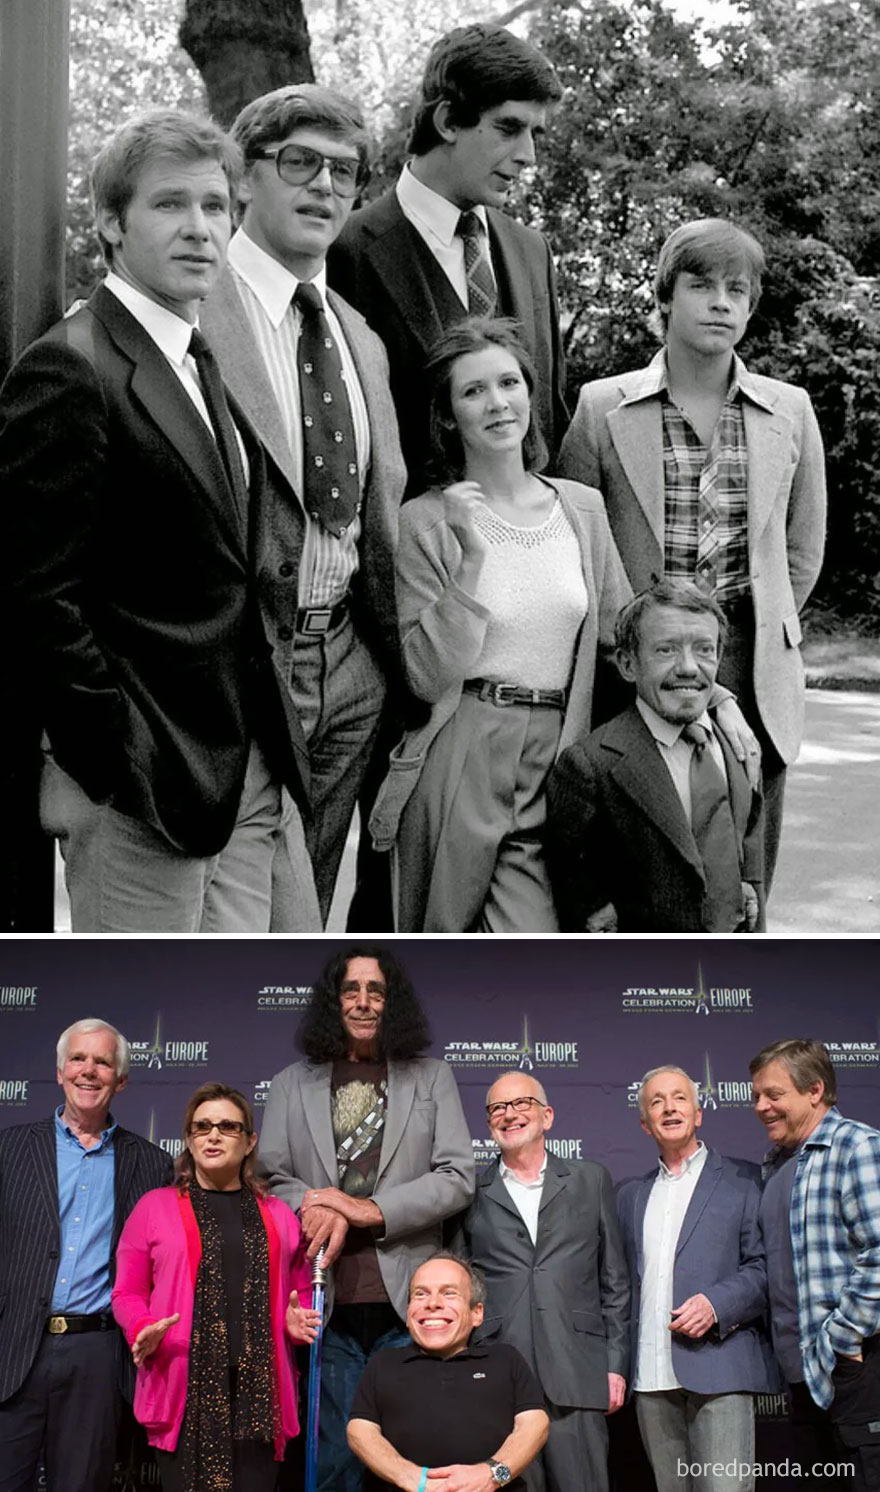 famous-tv-show-movie-reunions-68-58925f615bf18__880